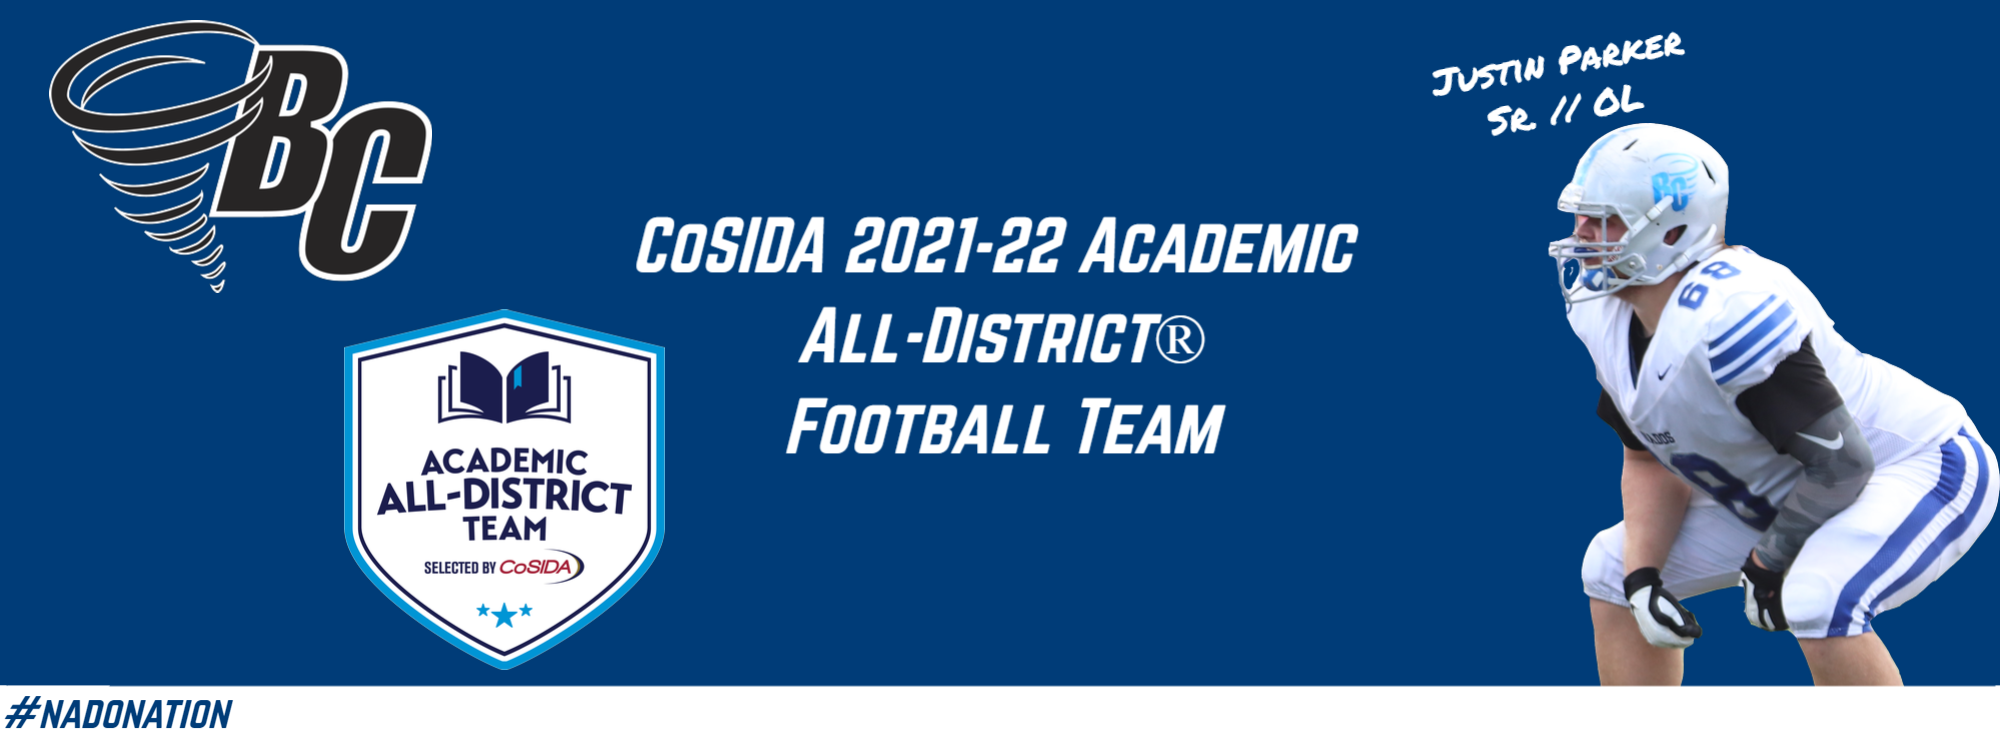 Parker Named CoSIDA Academic All-District for Second Straight Season